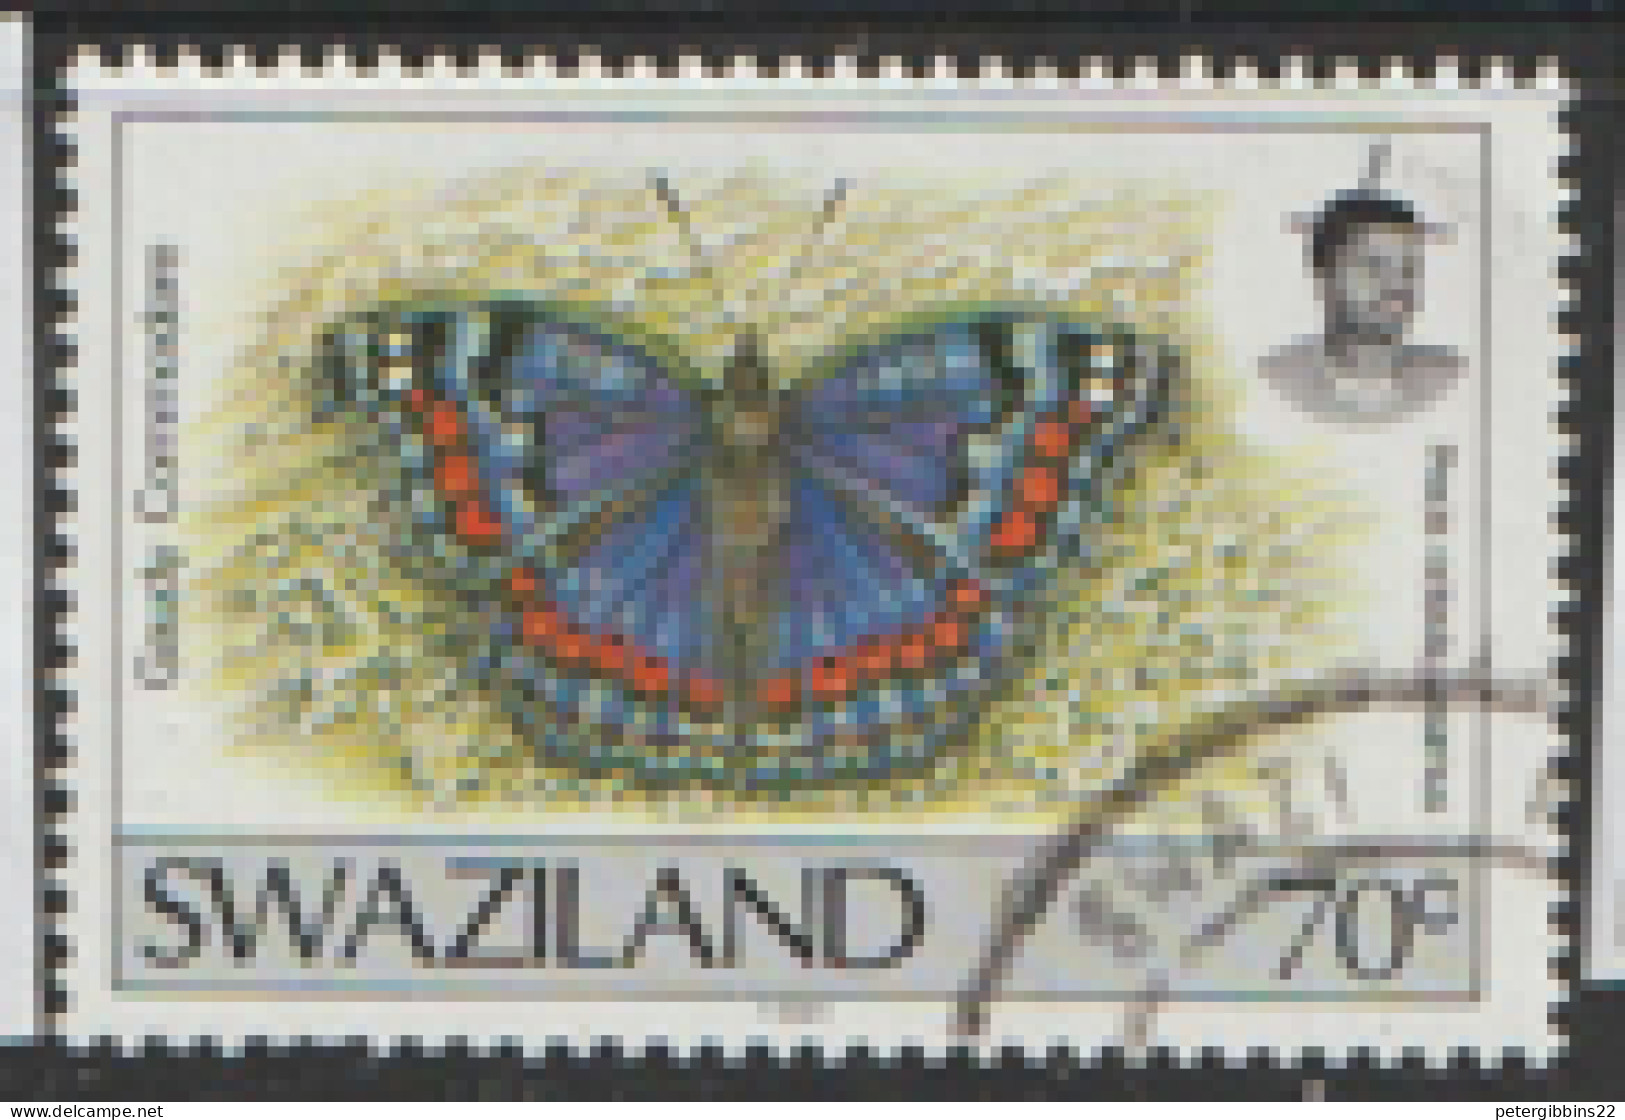 Swaziland  1992  SG  616  70c  Butterfly Fine Used - Swasiland (...-1967)